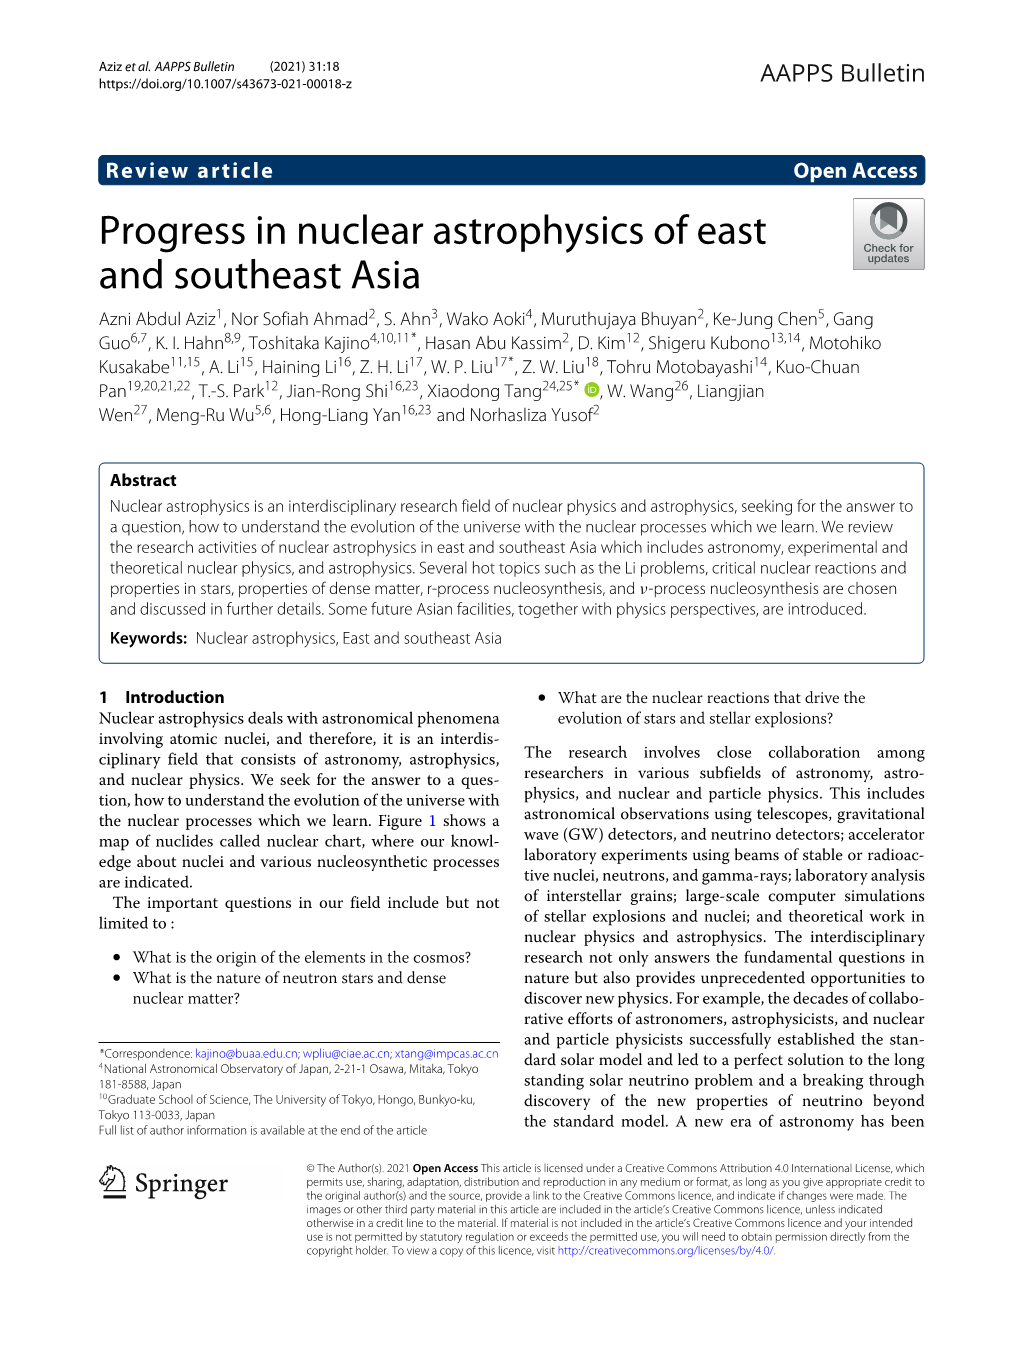 Progress in Nuclear Astrophysics of East and Southeast Asia